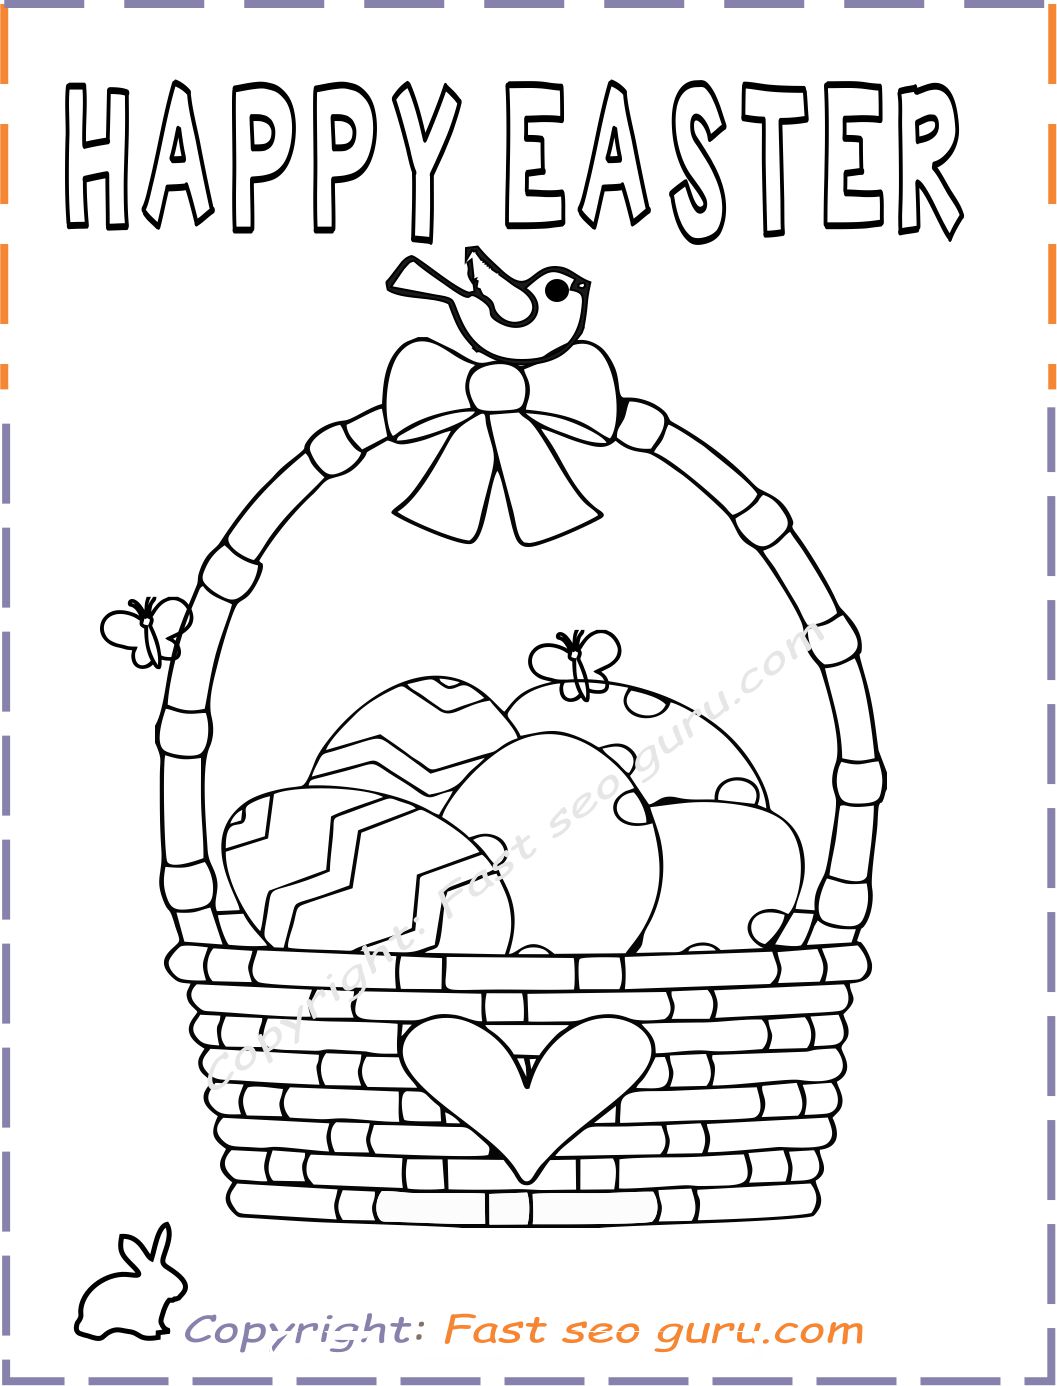 Basket of Easter Eggs coloring page